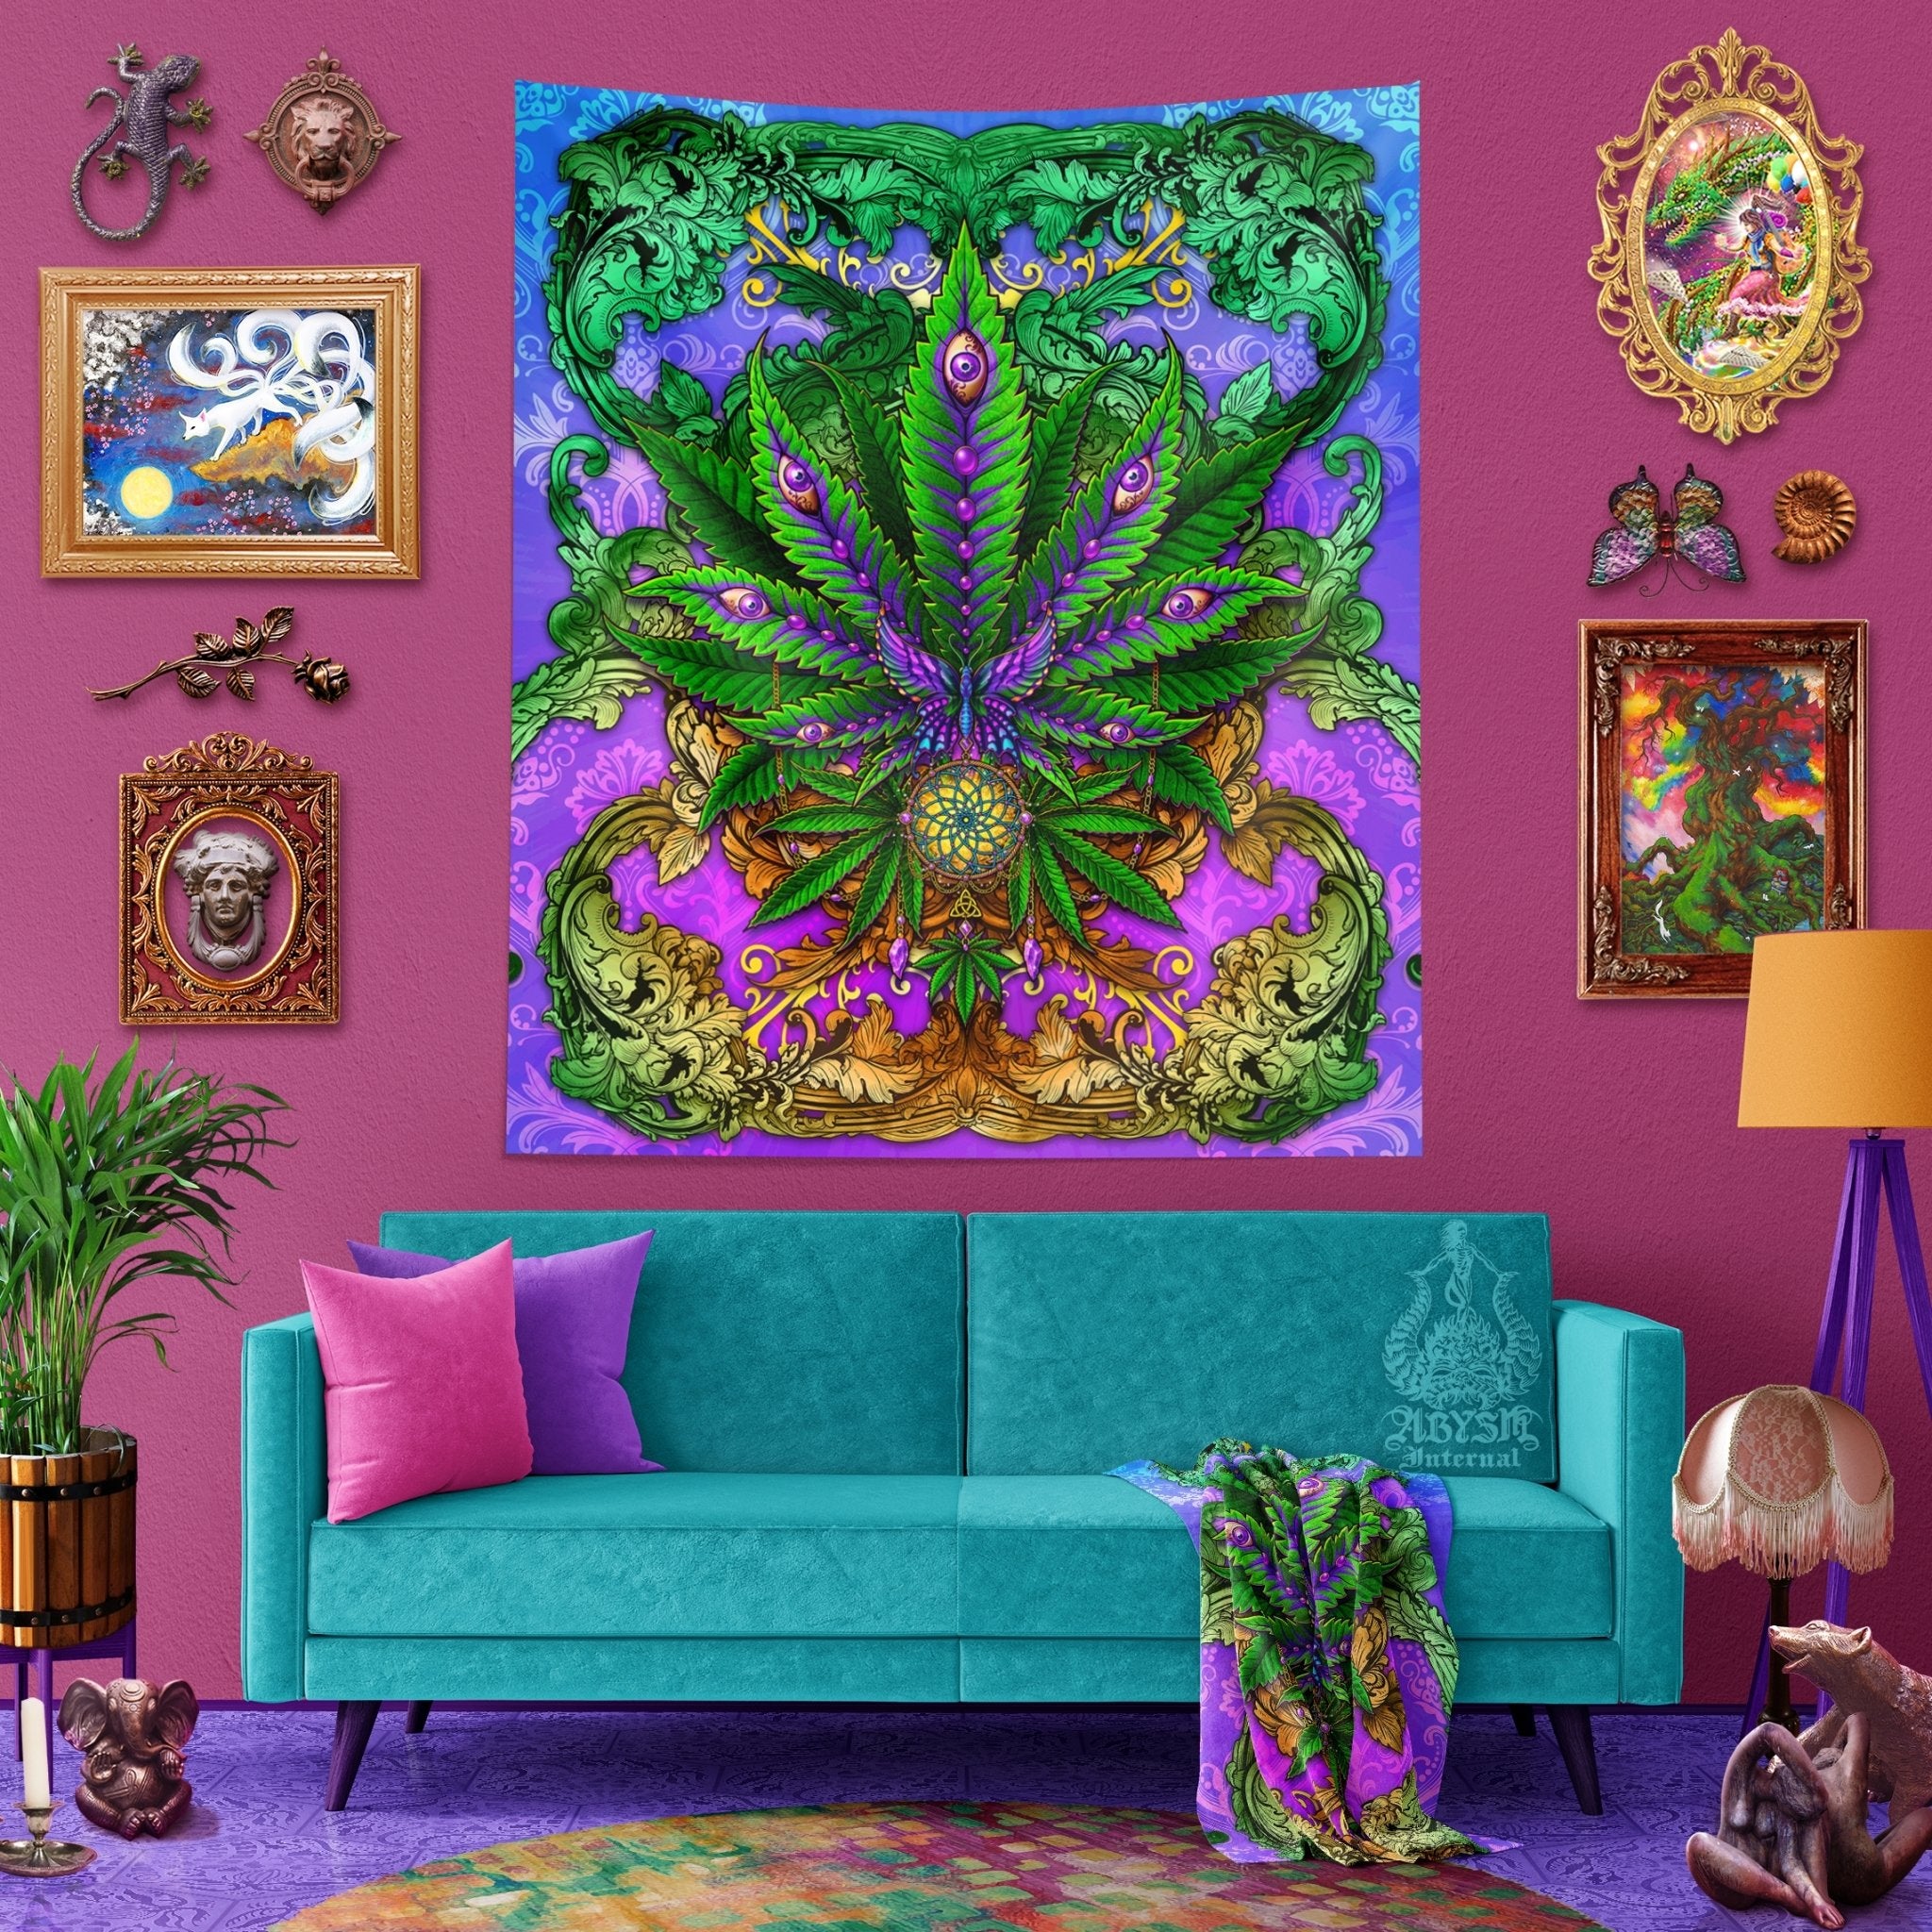 Weed Tapestry, Cannabis Shop Decor, Marijuana Wall Hanging, Hippie Home Decor, Indie Art Print, 420 Gift, Eclectic and Funky - Nature - Abysm Internal